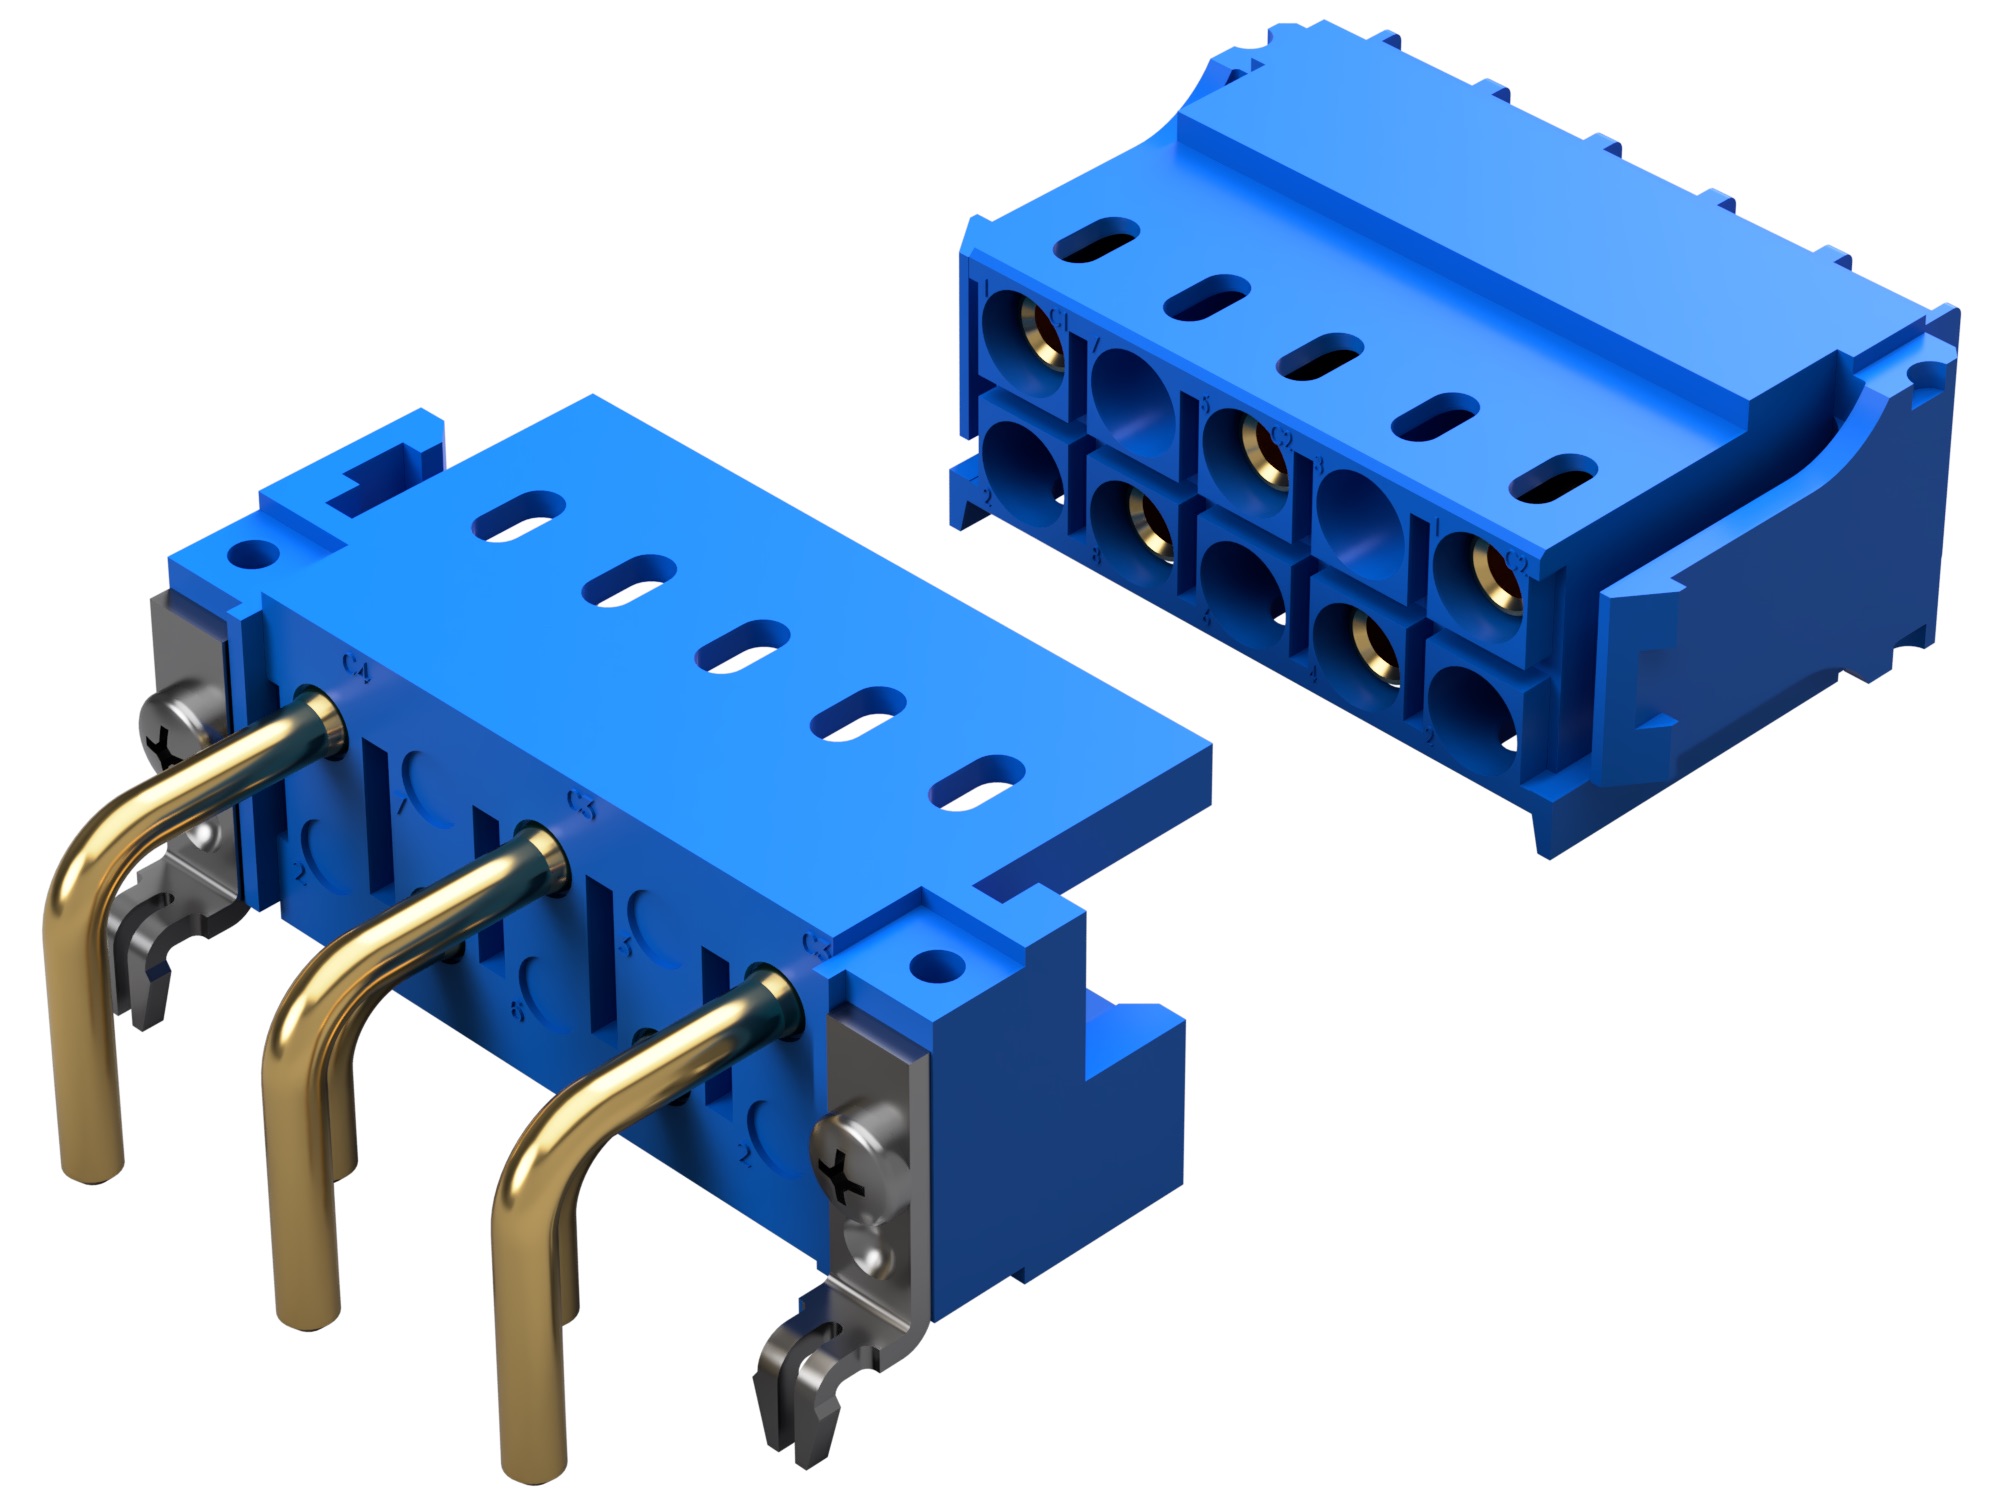 data center power connectors from Positronic Scorpion series